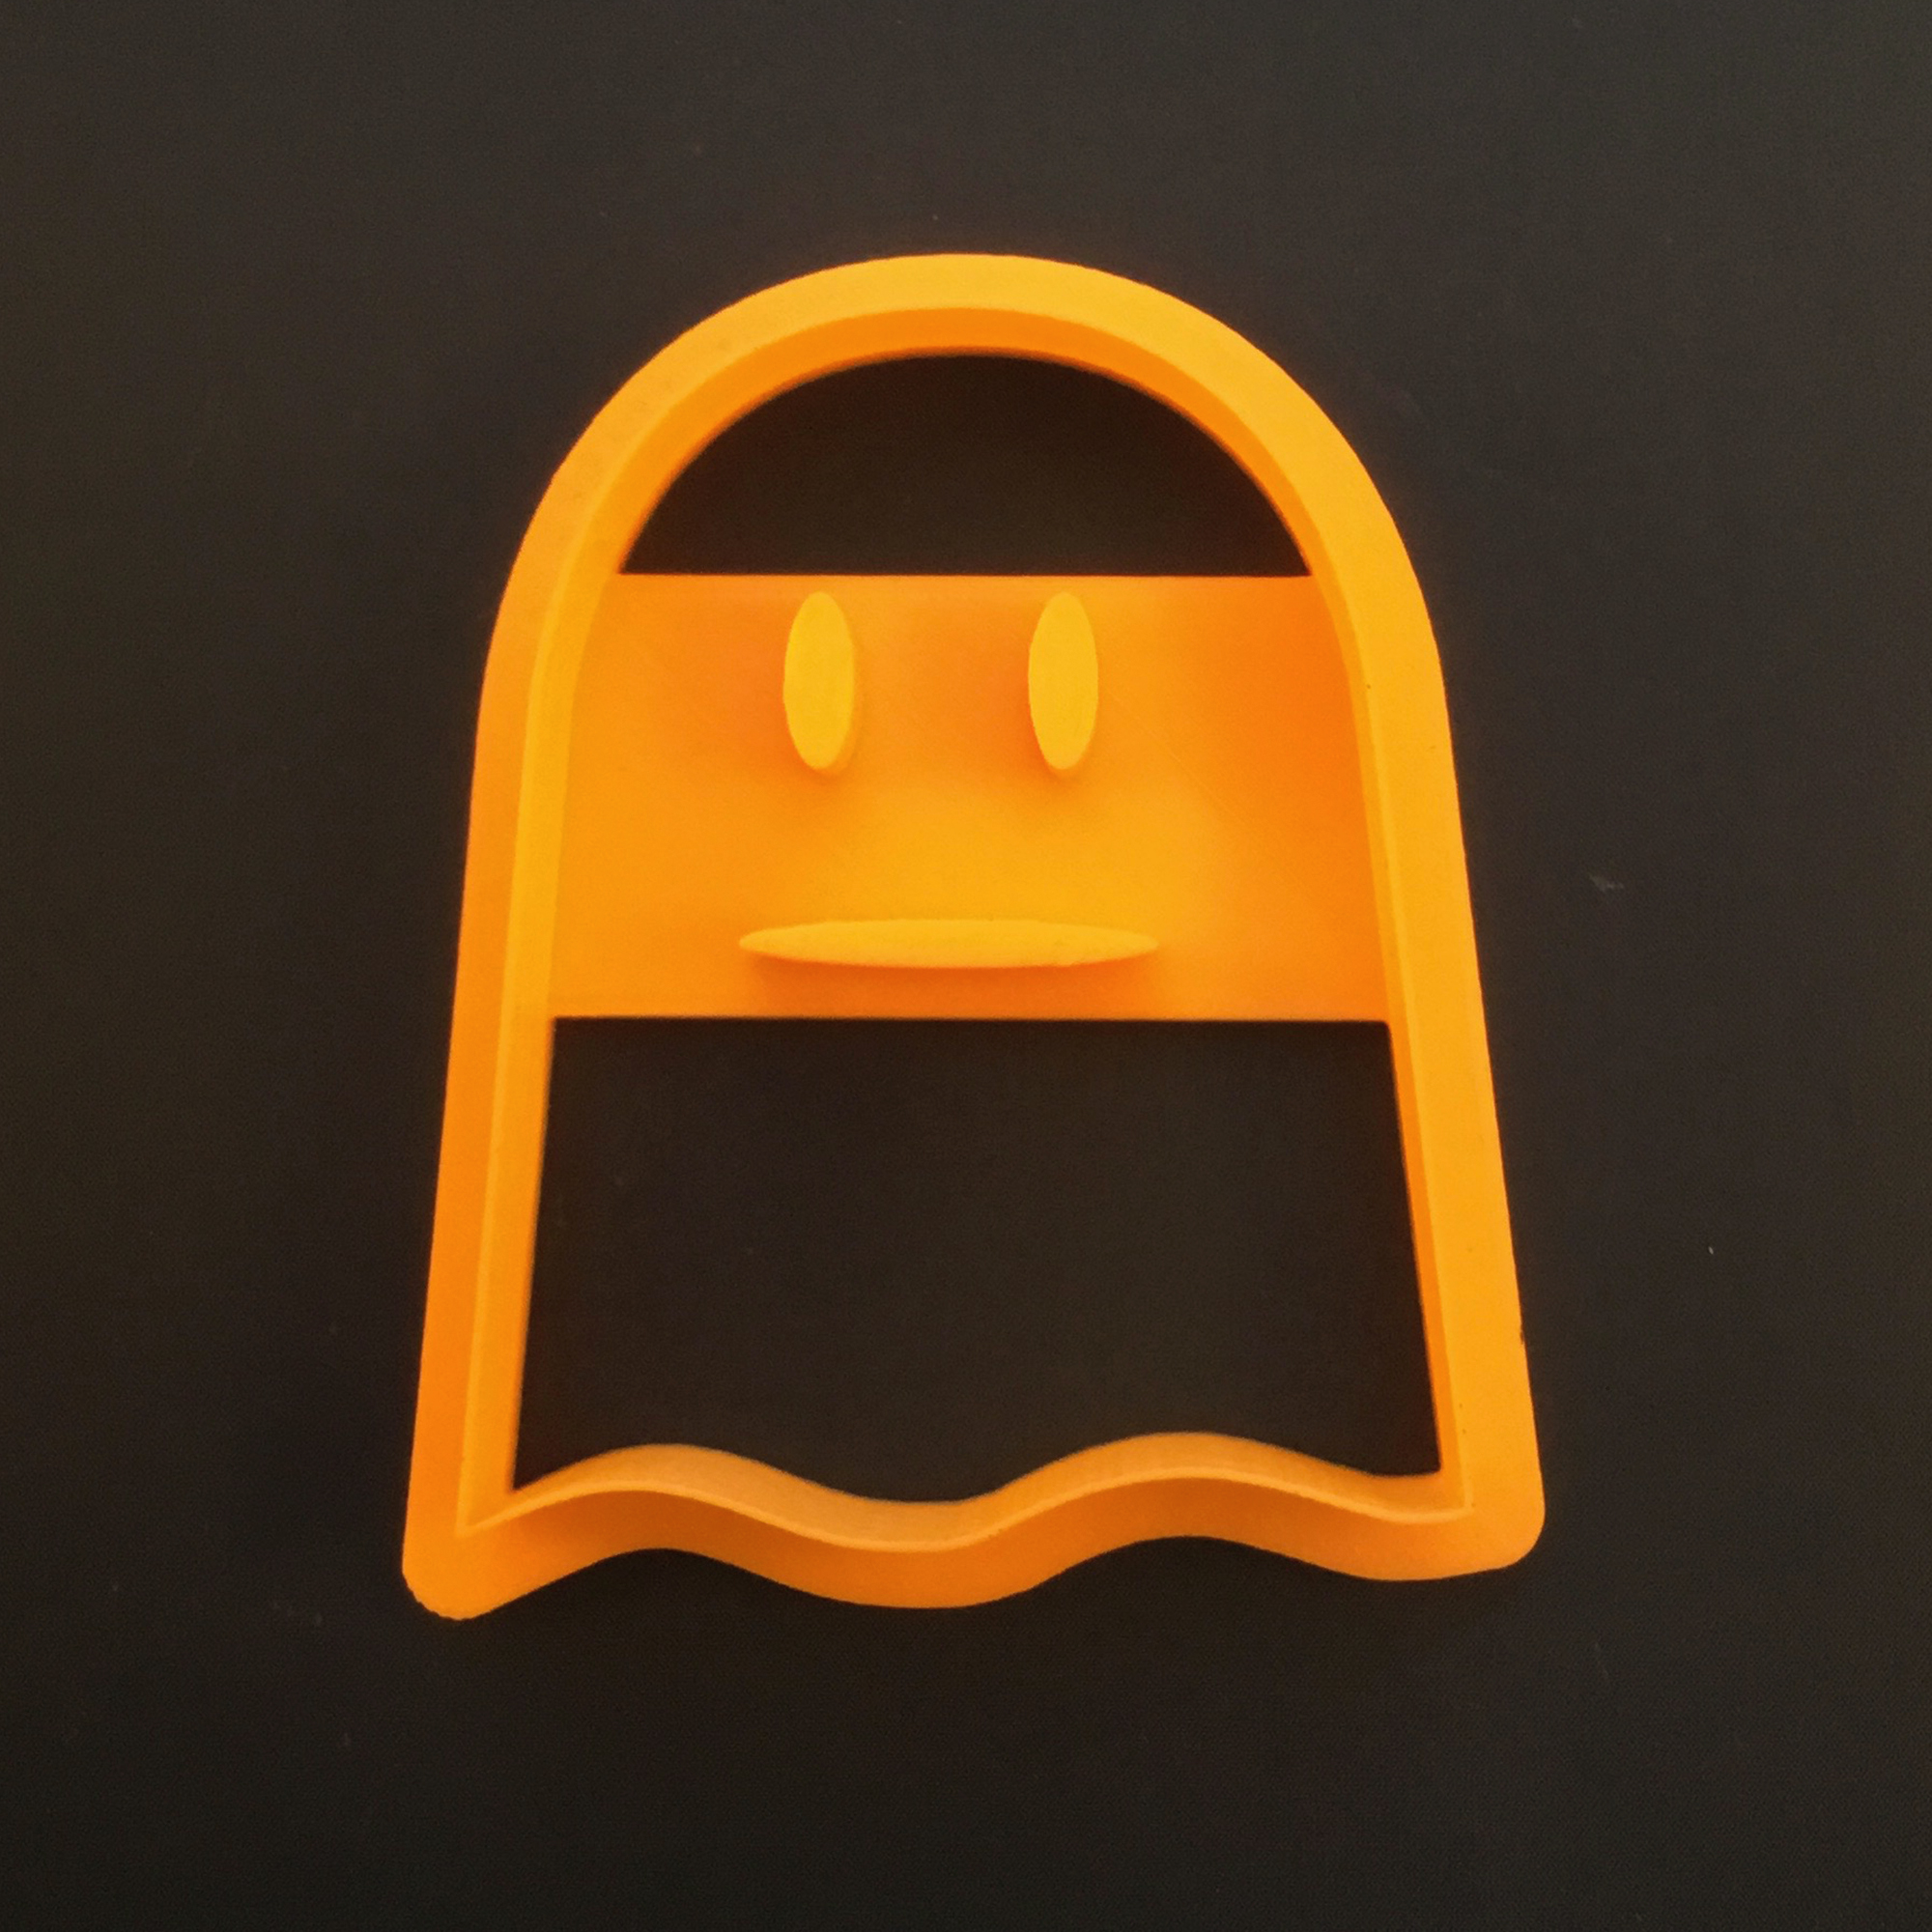 Ghost Cookie Cutter, 3D printed Cookie cutter, Halloween